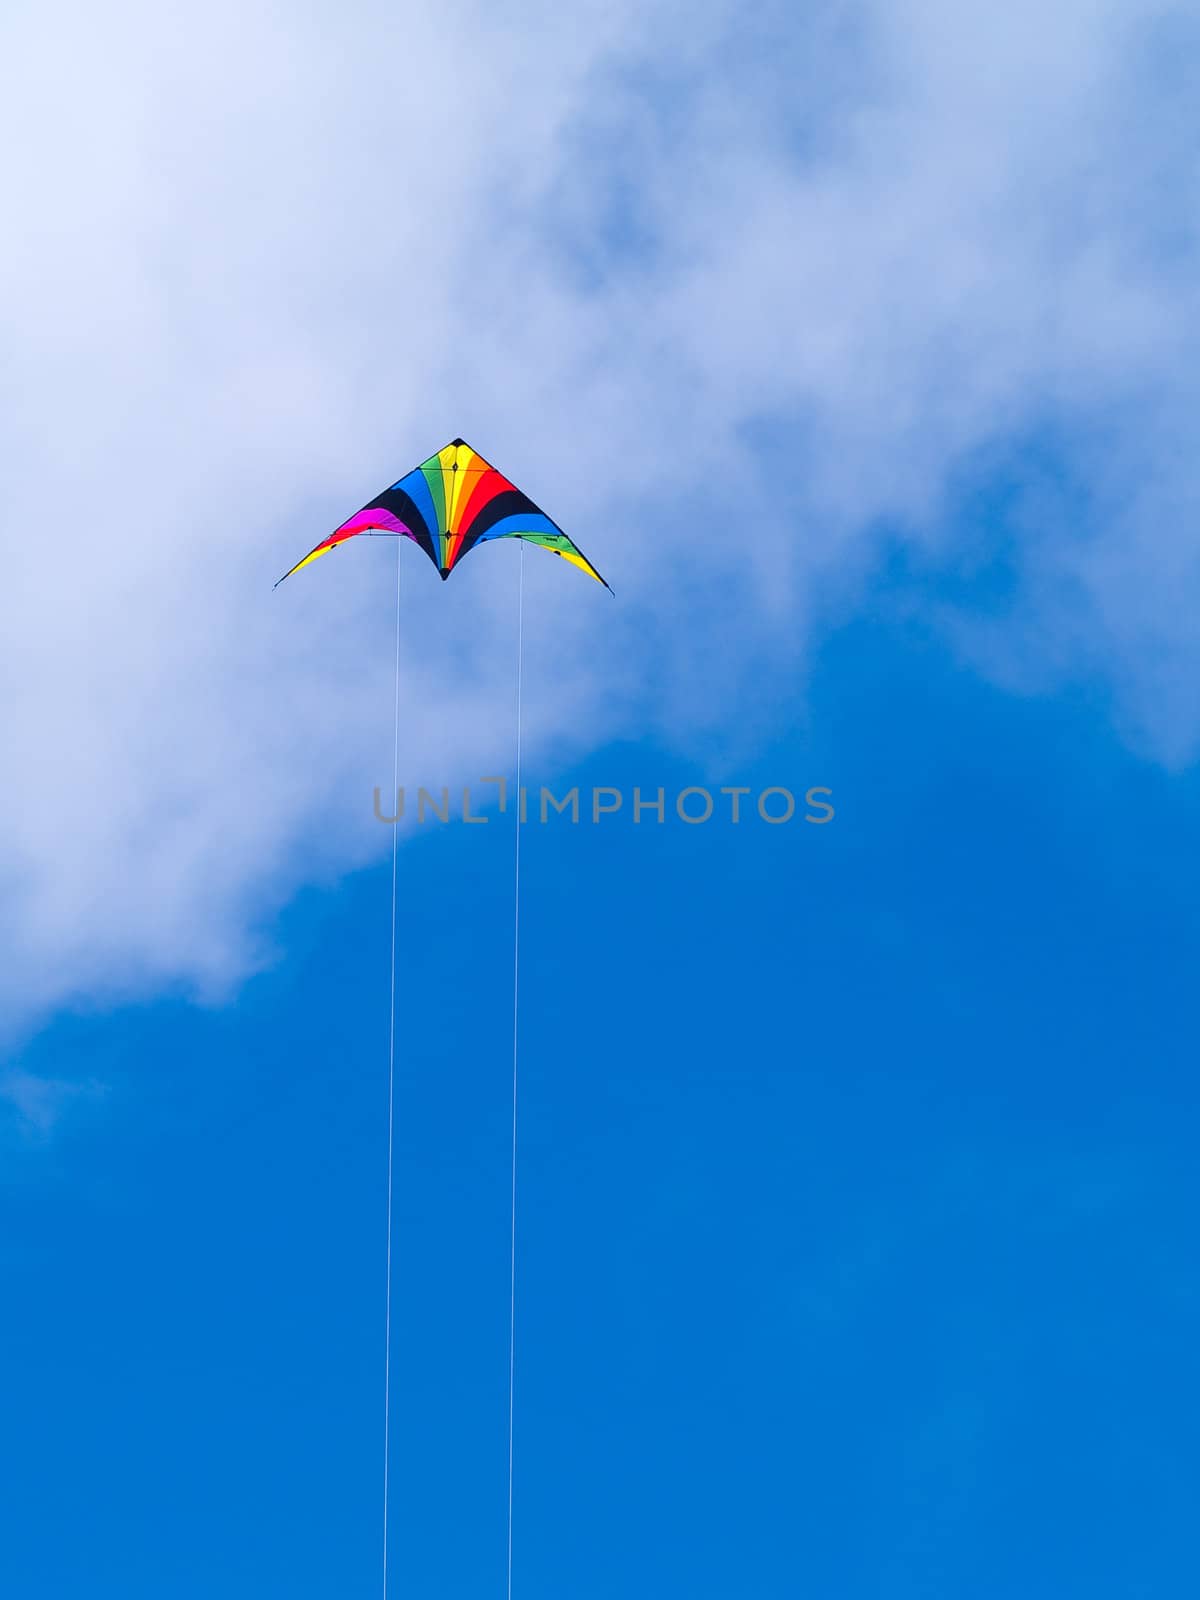 A rainbow colored stunt kite against a blue sky with wispy clouds.